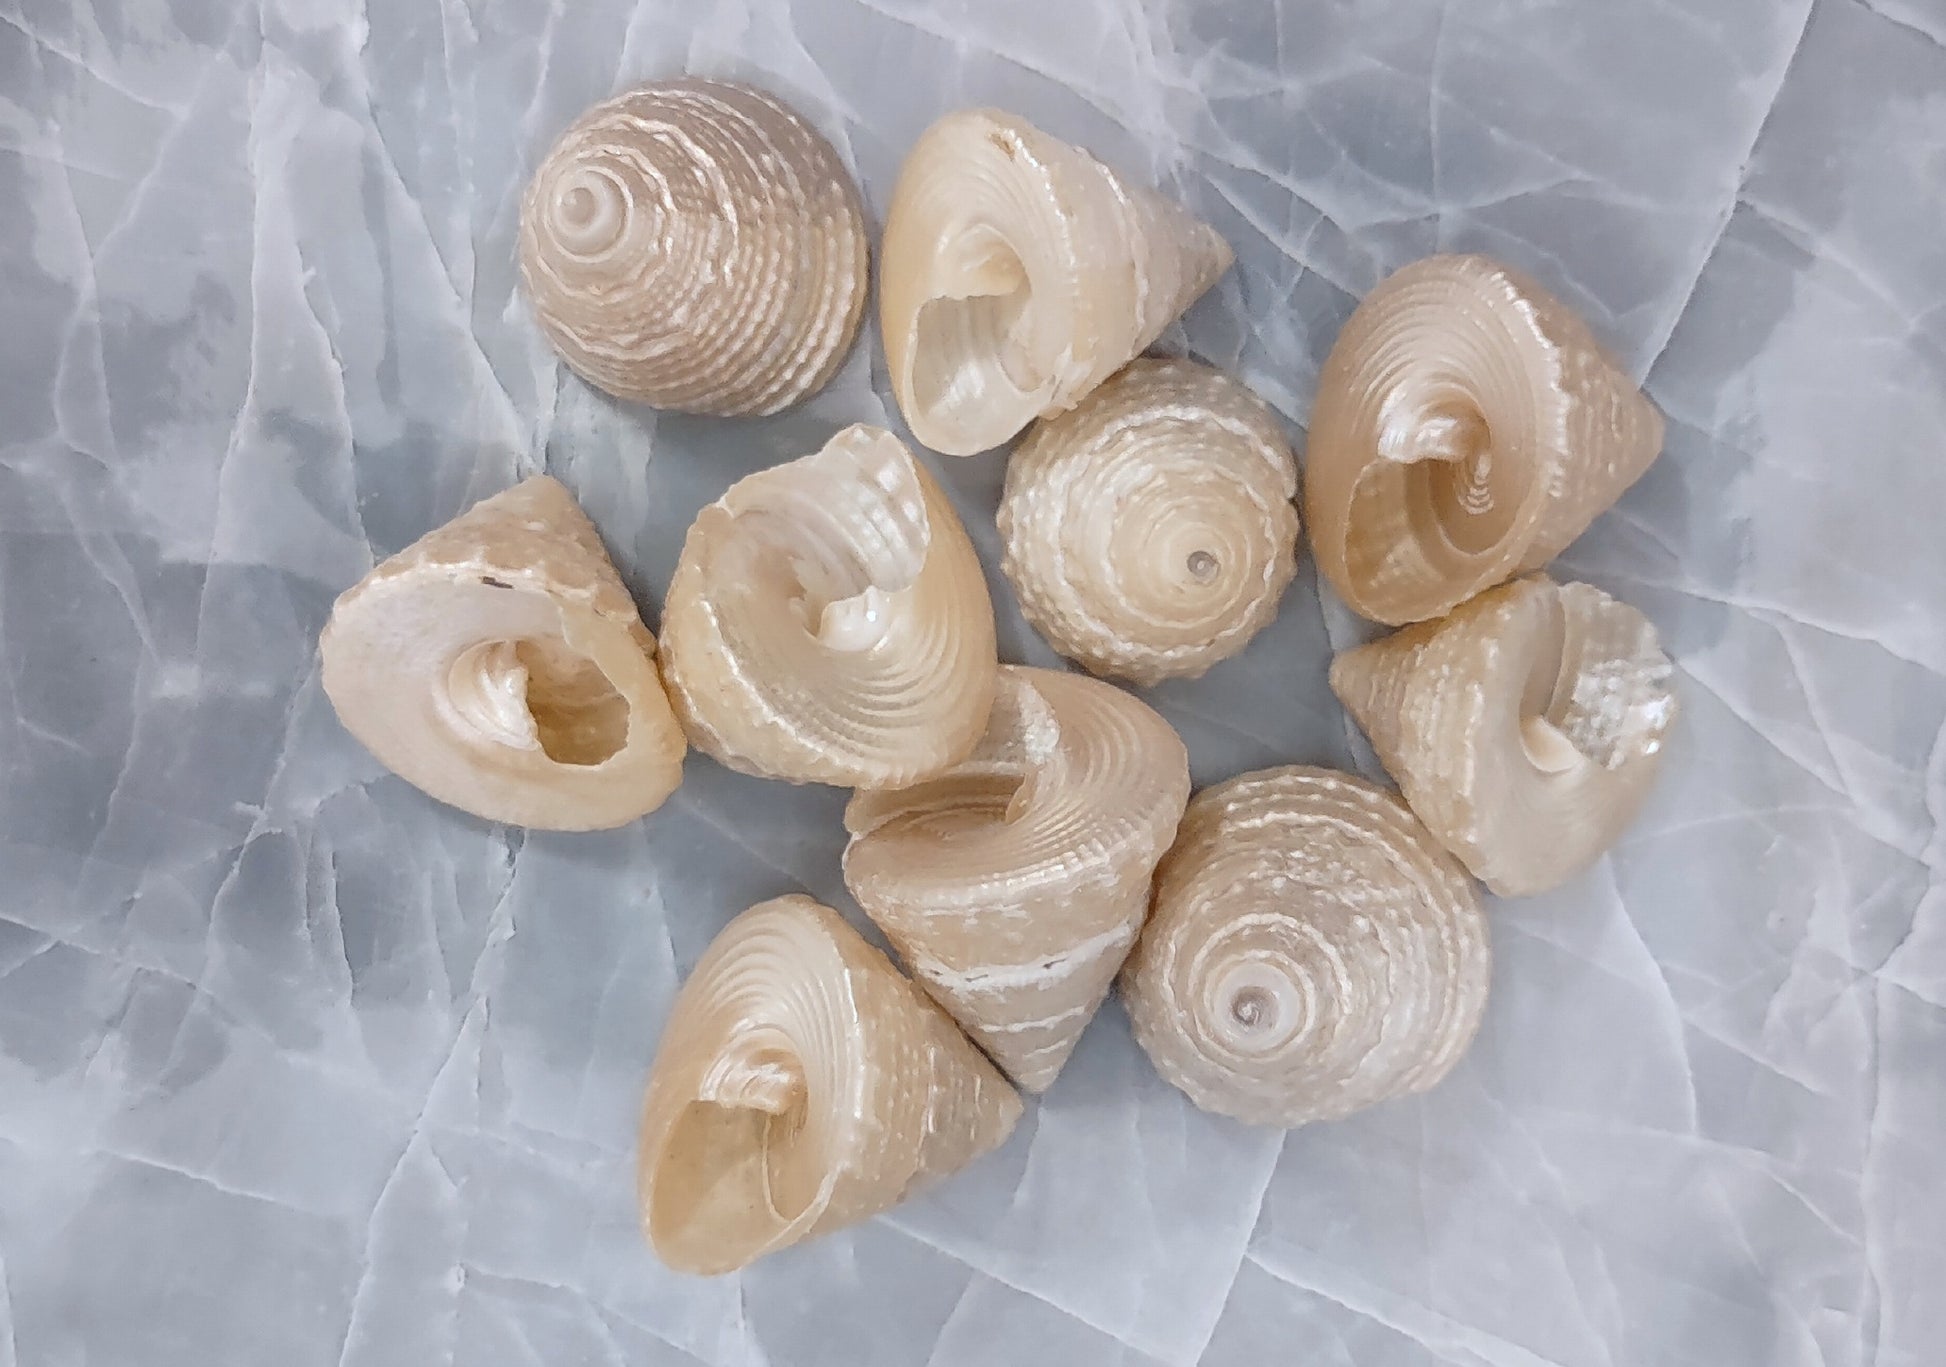 Pearlized Trochus Seashell - Trochus Niloticus - (10 shells approx. .75-1 inch). Multiple white shiny spiral shells in a grouping. Copyright 2022 SeaShellSupply.com.